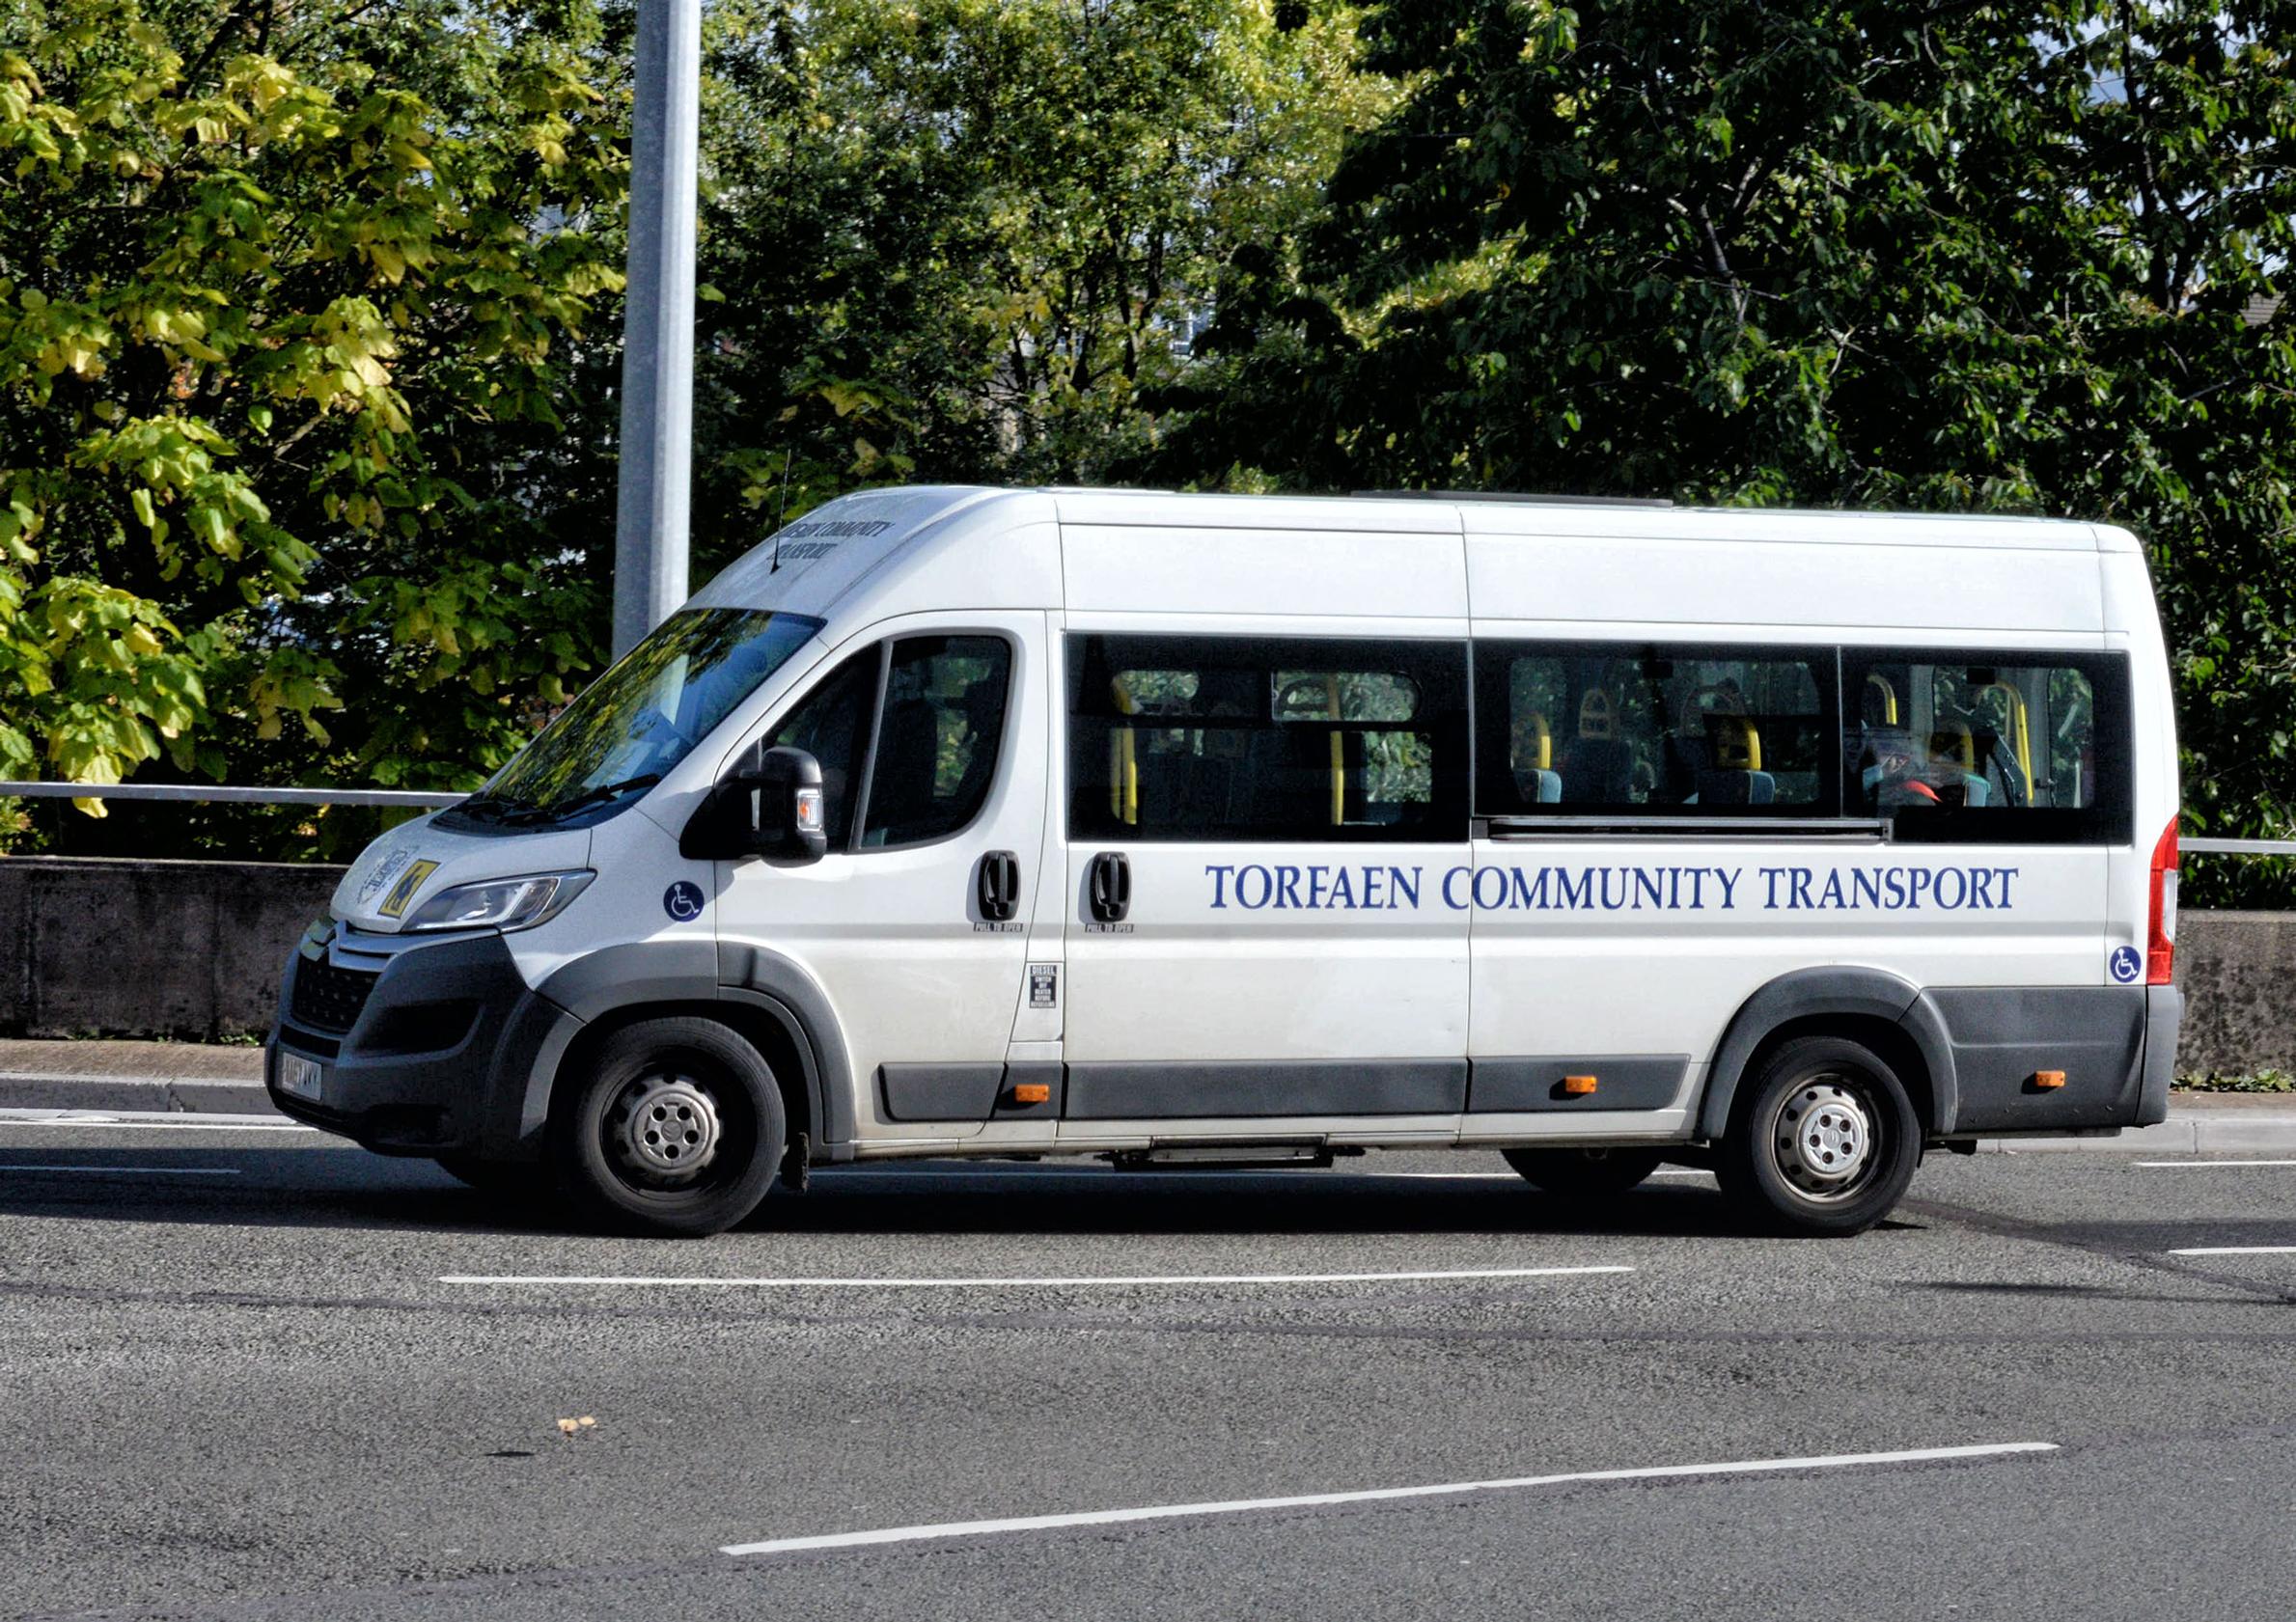 Concessionary passengers show preference for community transport